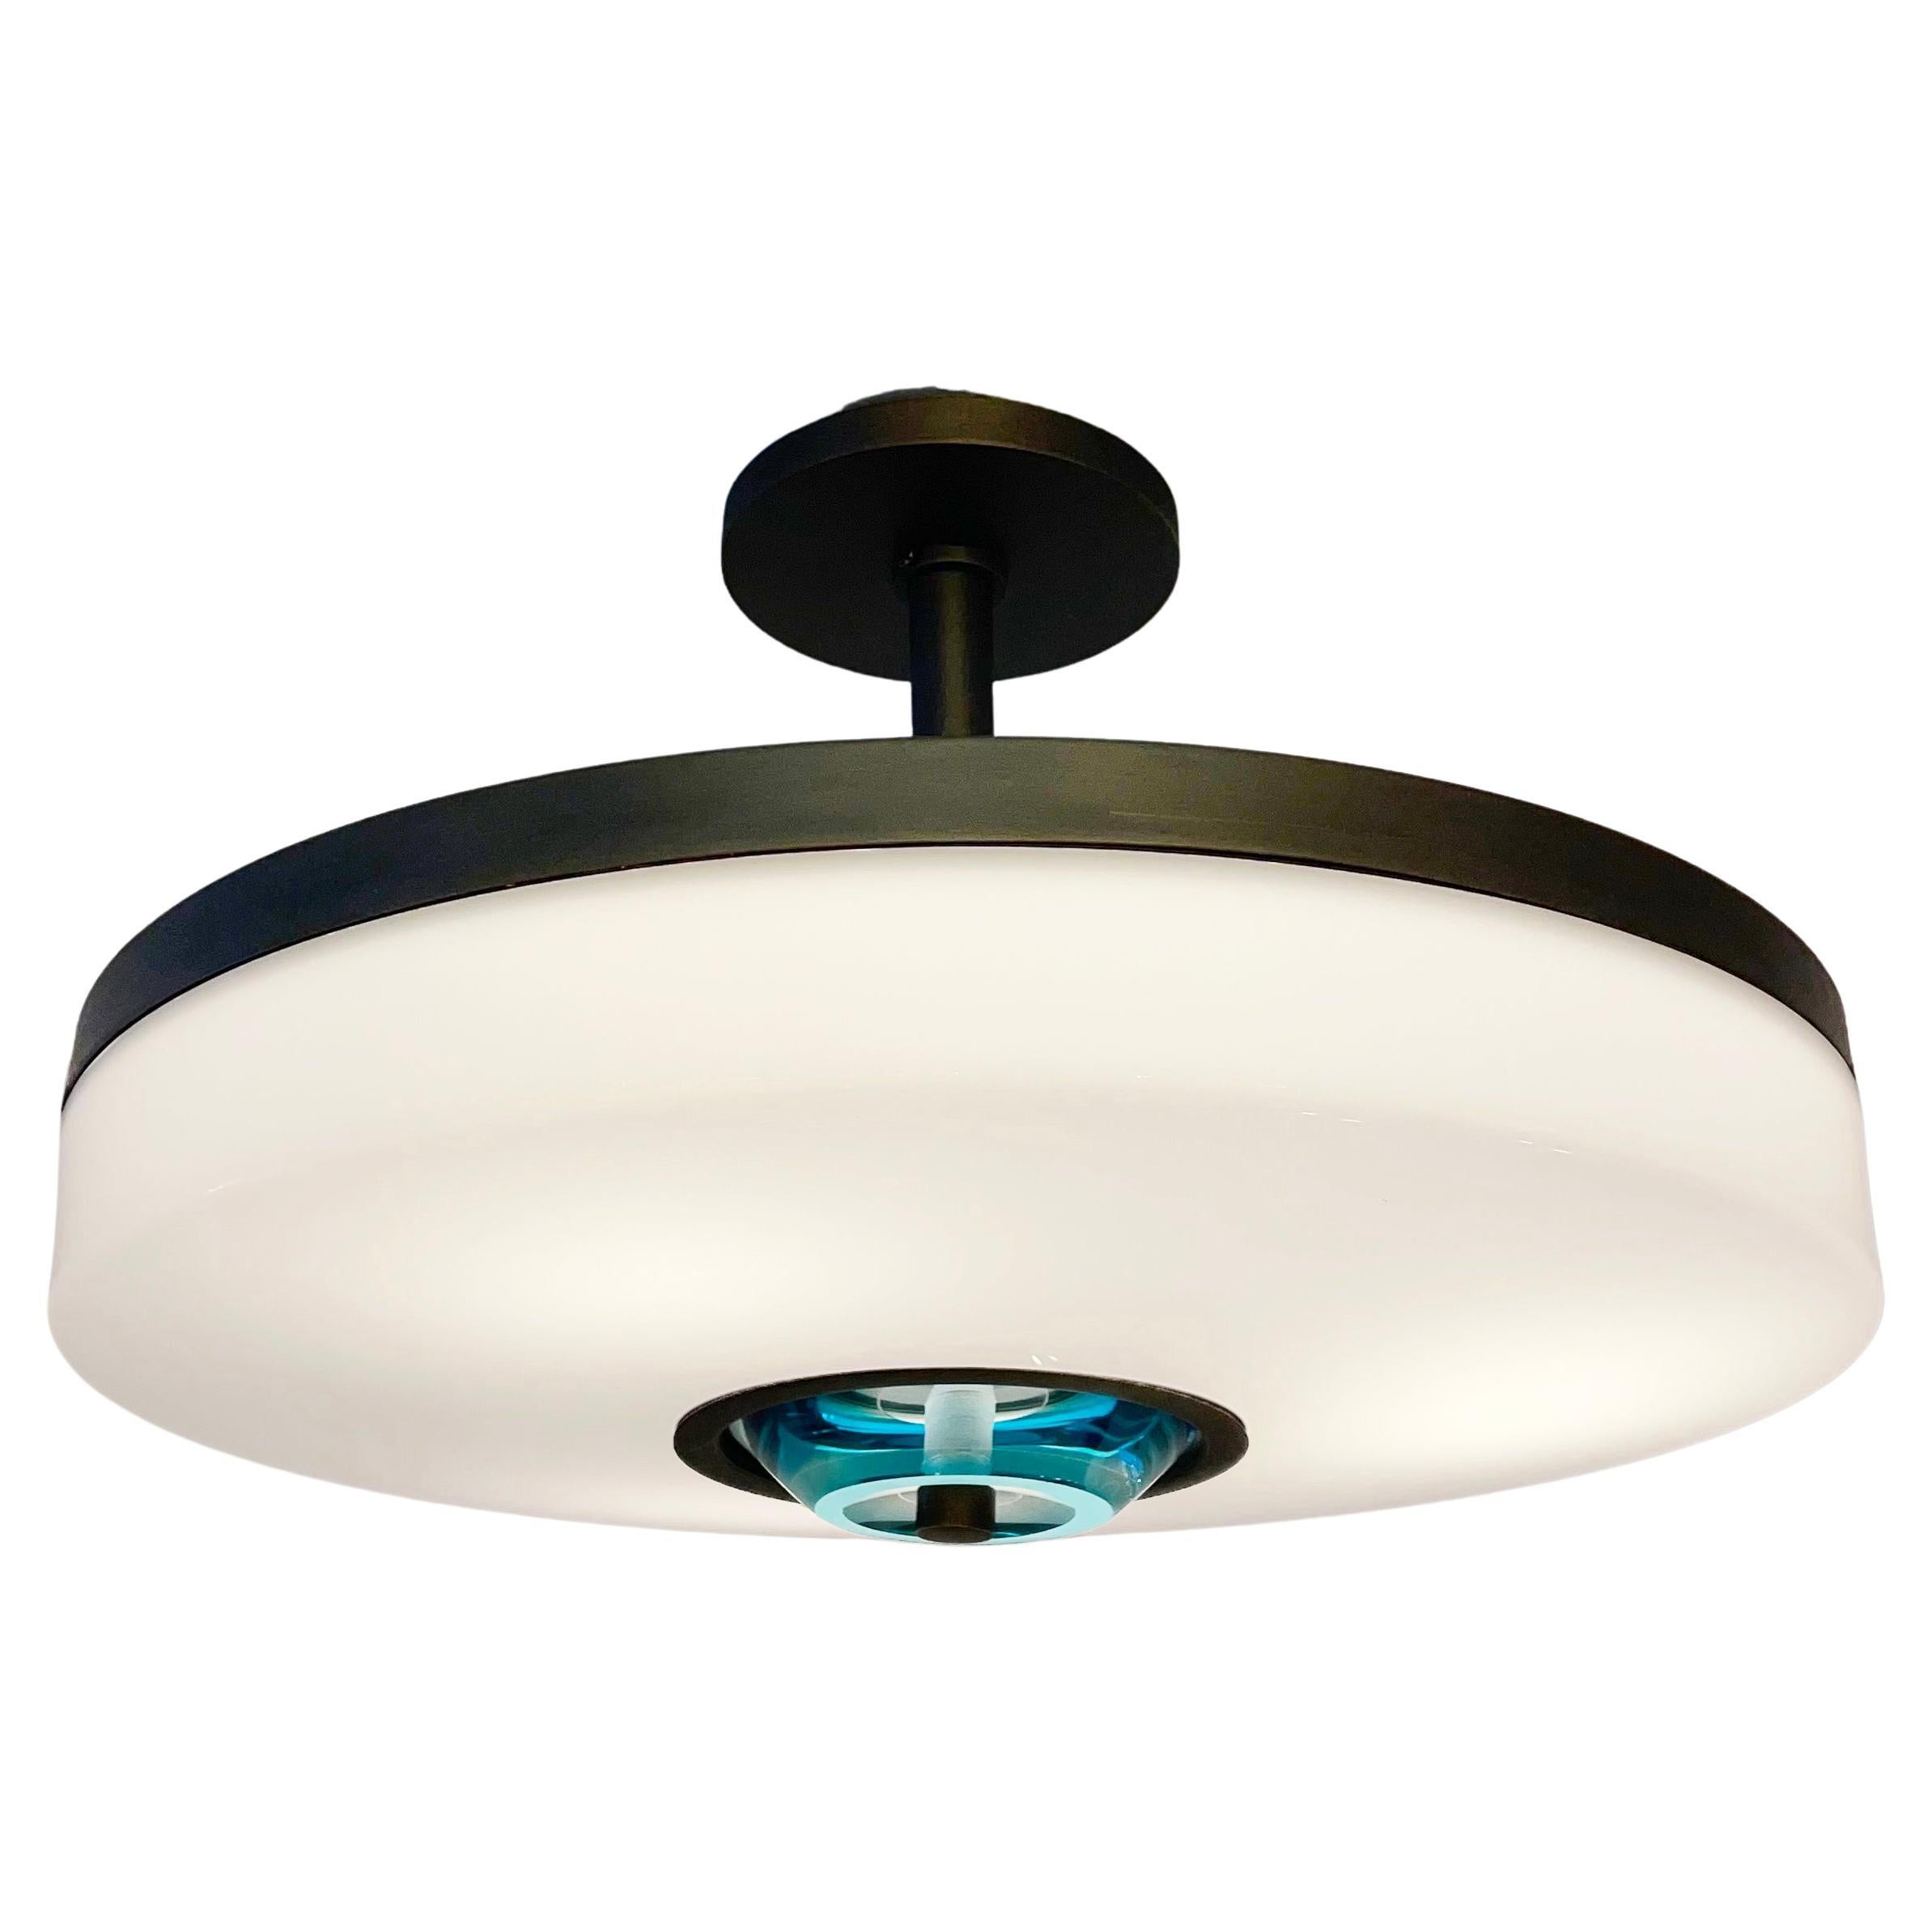 The Iris Piccolo ceiling light is designed around an expansive acrylic shade with a hand carved glass center. This versatile fixture can be installed as a pendant on a stem or as a true flush mount. Shown in our Brunito Nero finish. Price listed for